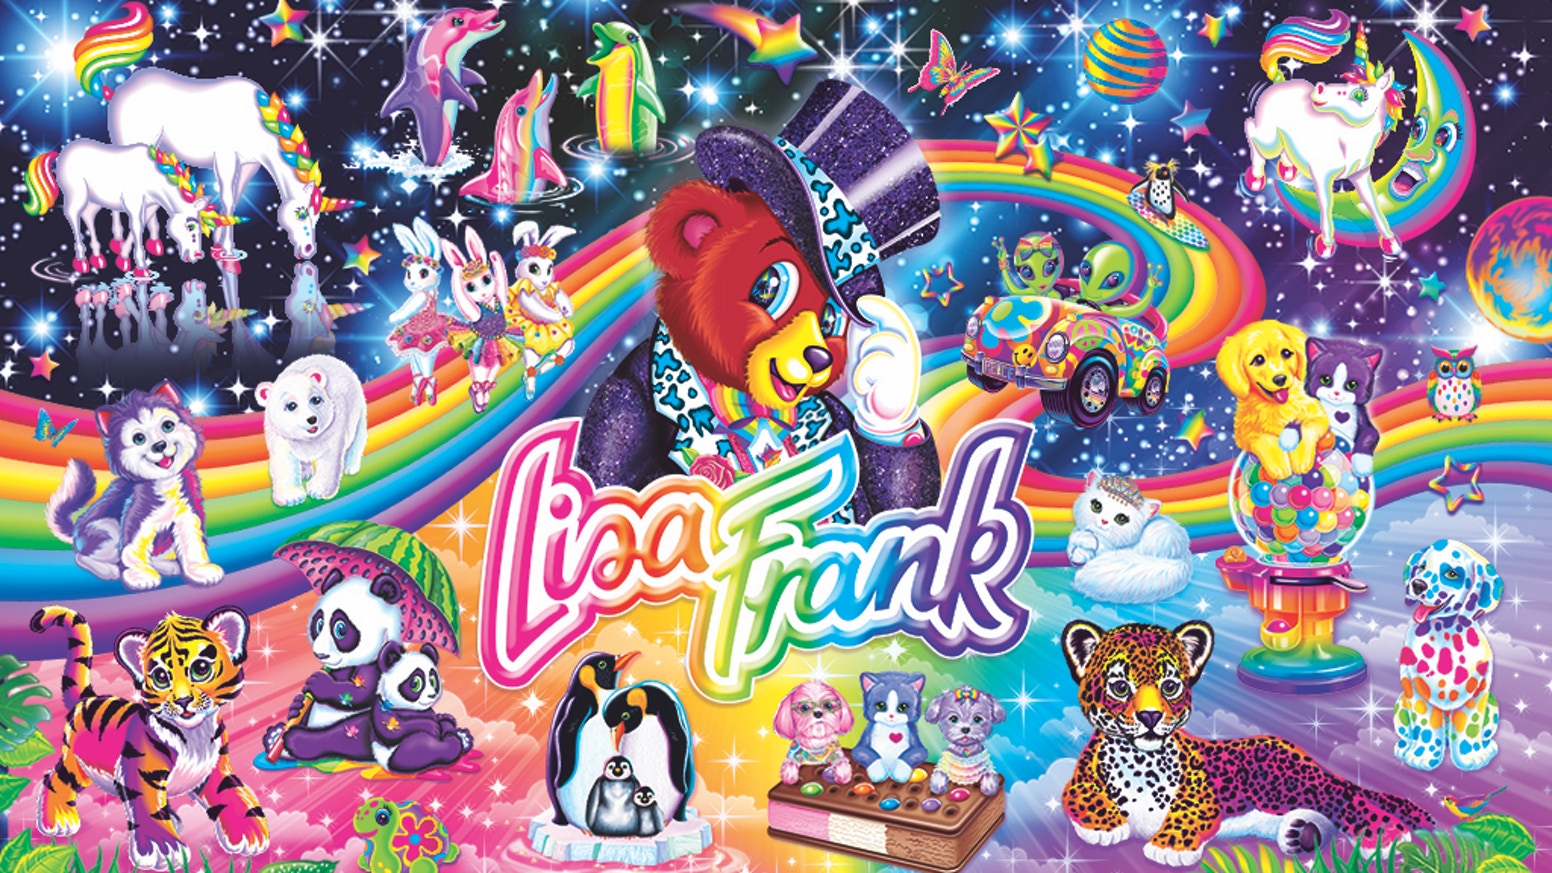 2. Rainbow and butterfly Lisa Frank tattoo - wide 5